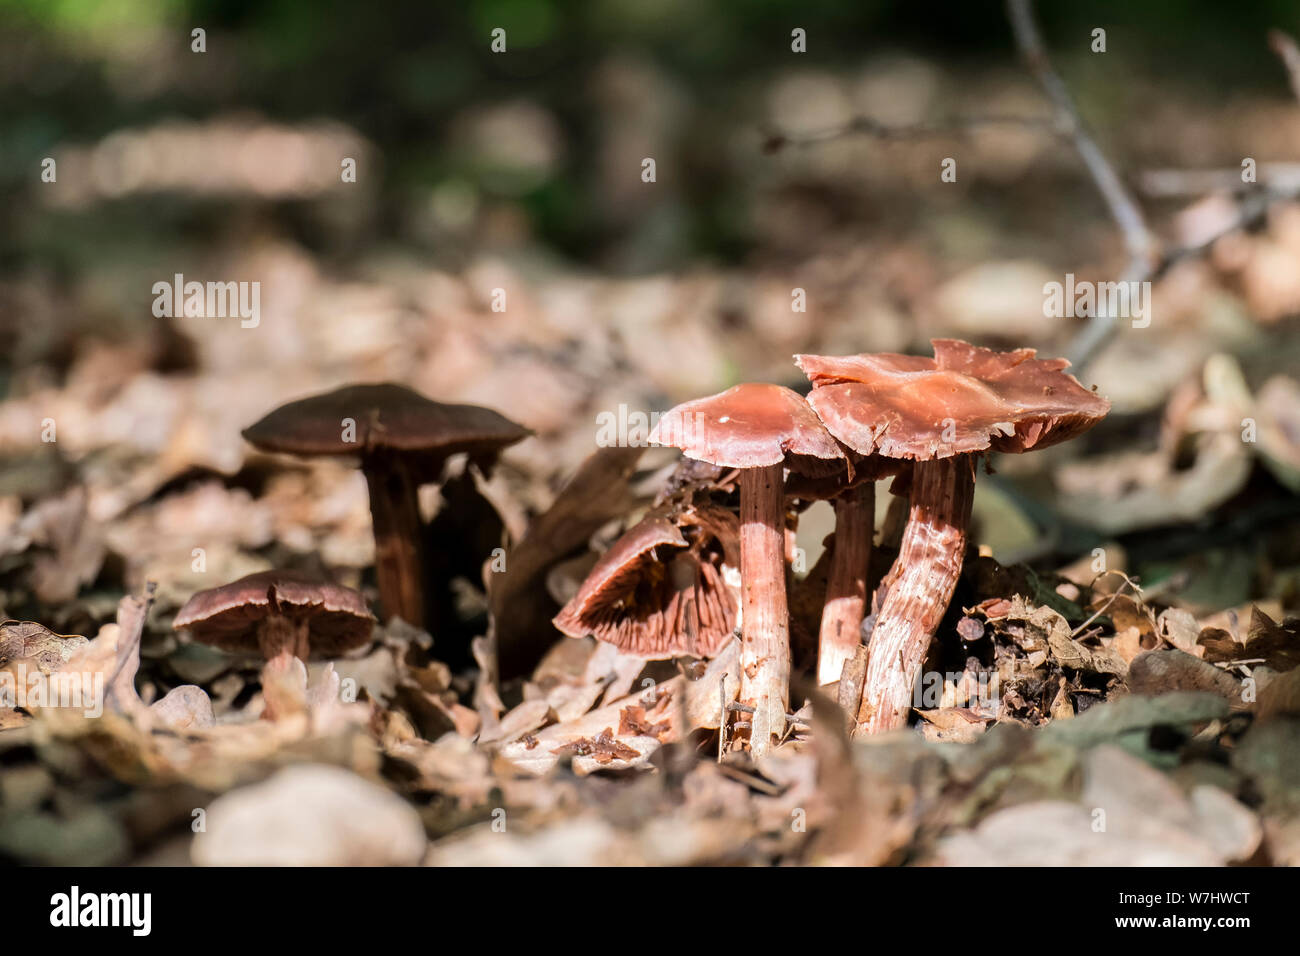 Inedible mushrooms. Old brown forest mushrooms Stock Photo